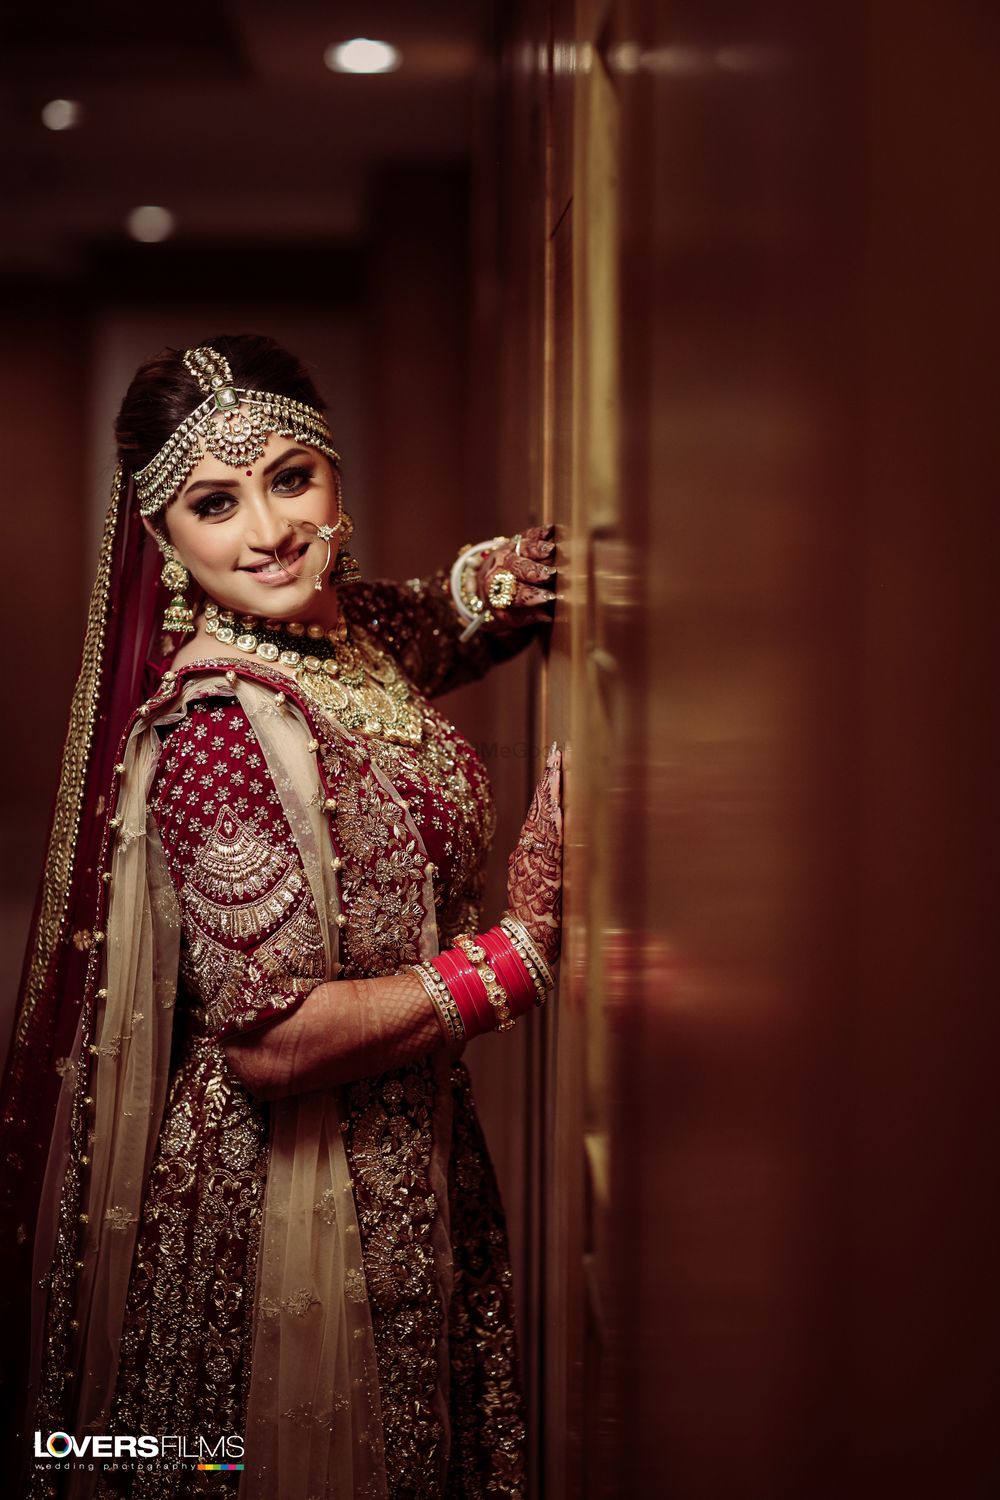 Photo of A bride in a maroon lehenga posing on her wedding day